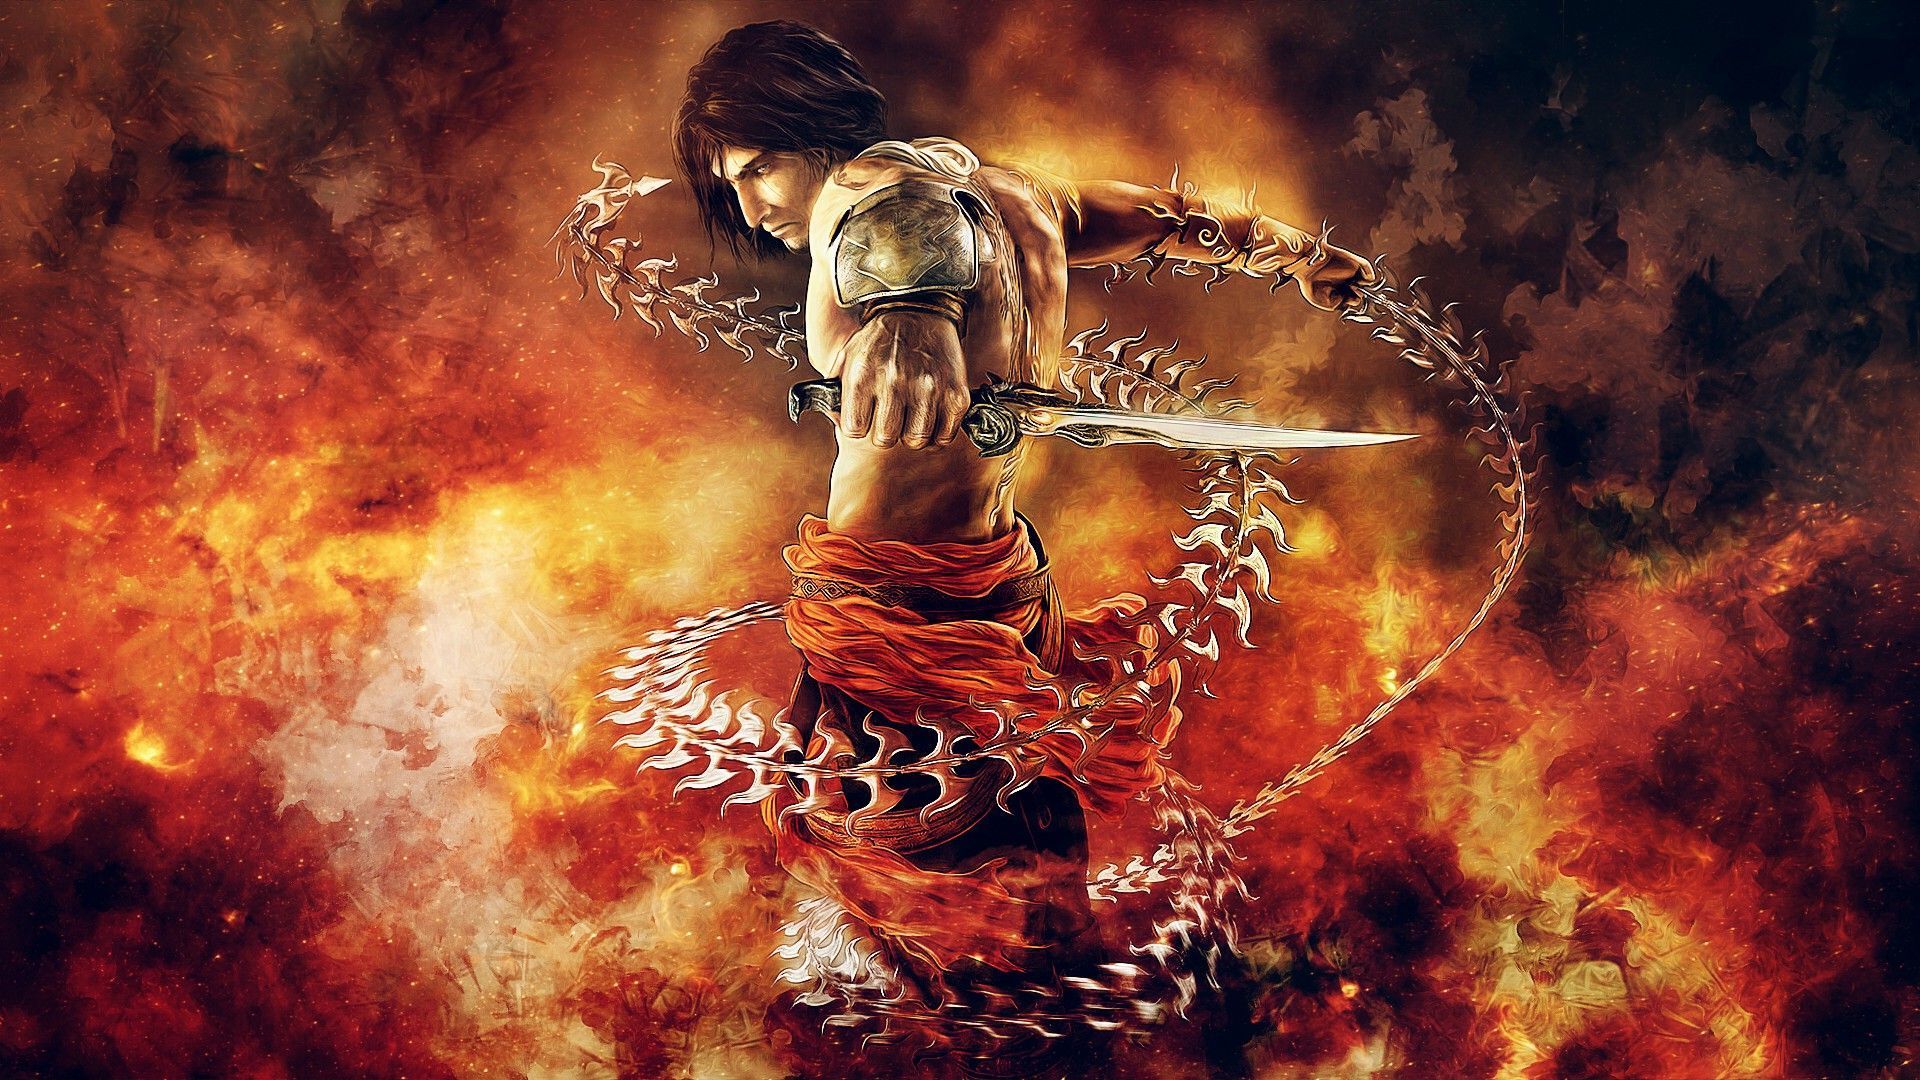 Prince Of Persia The Two Thrones HD Phenomenal Wallpaper Free HD